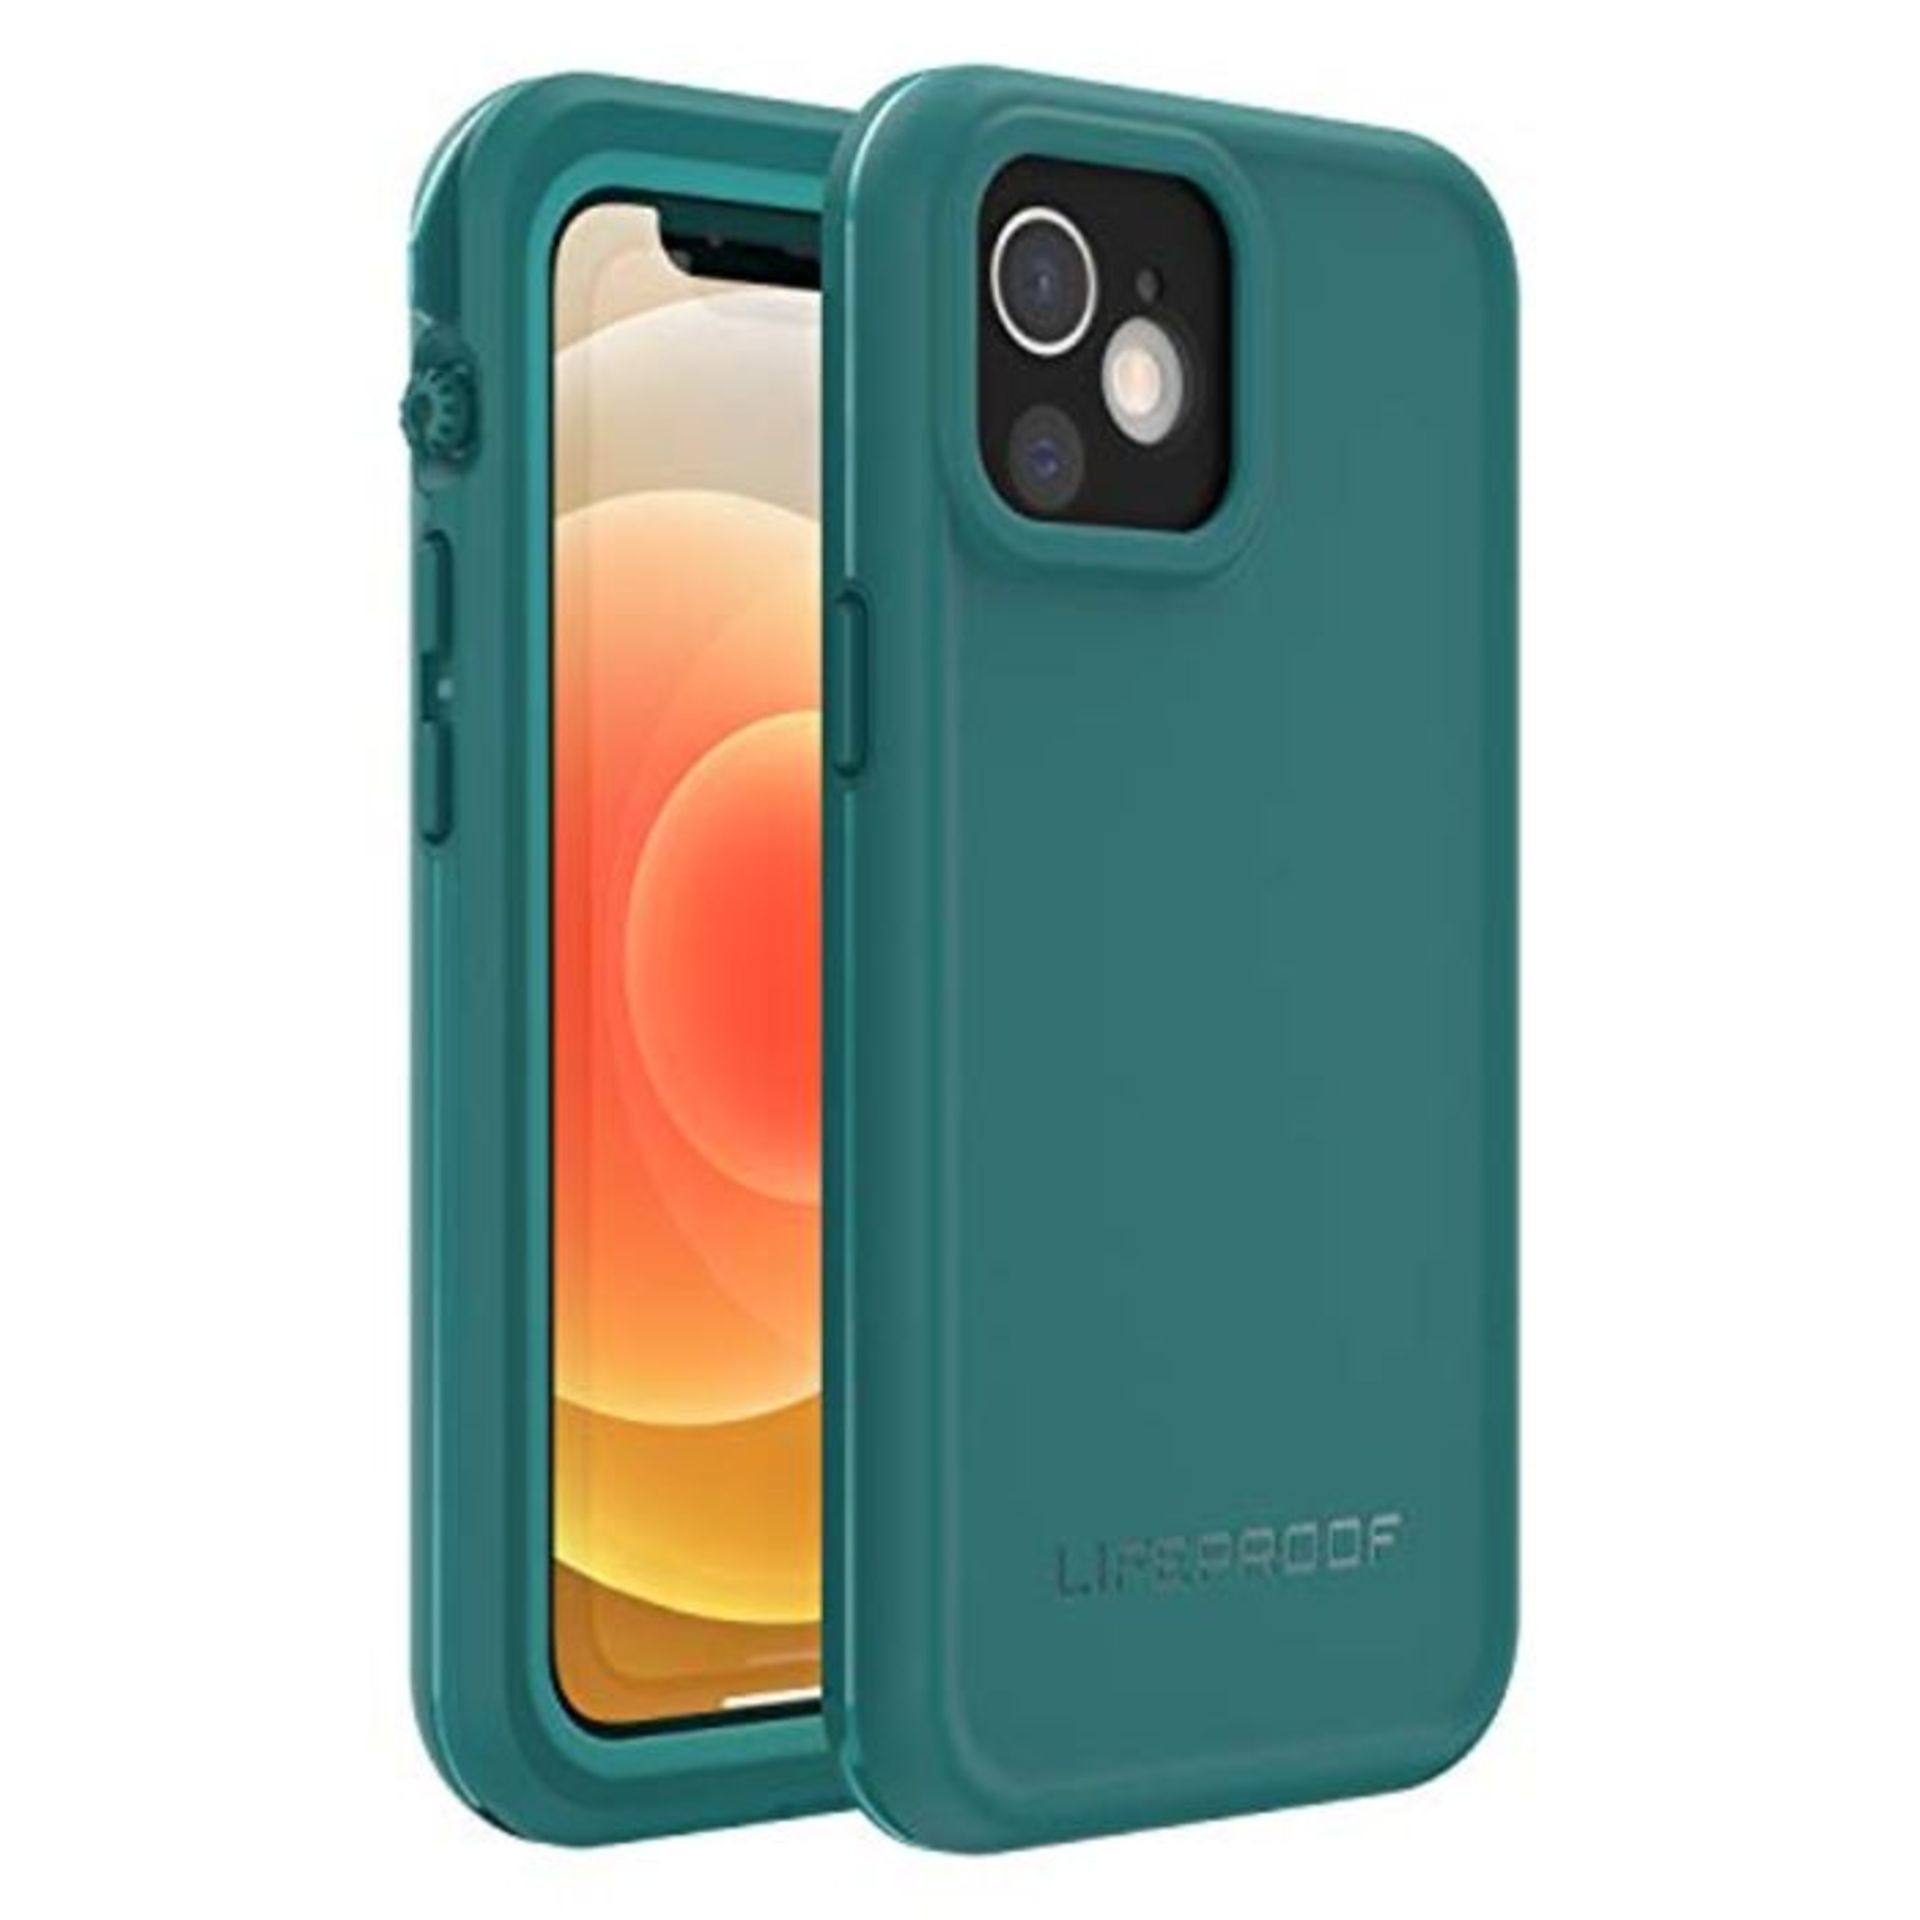 RRP £63.00 LifeProof for iPhone 12 mini, Waterproof Drop Protective Case, Fre Series, Blue